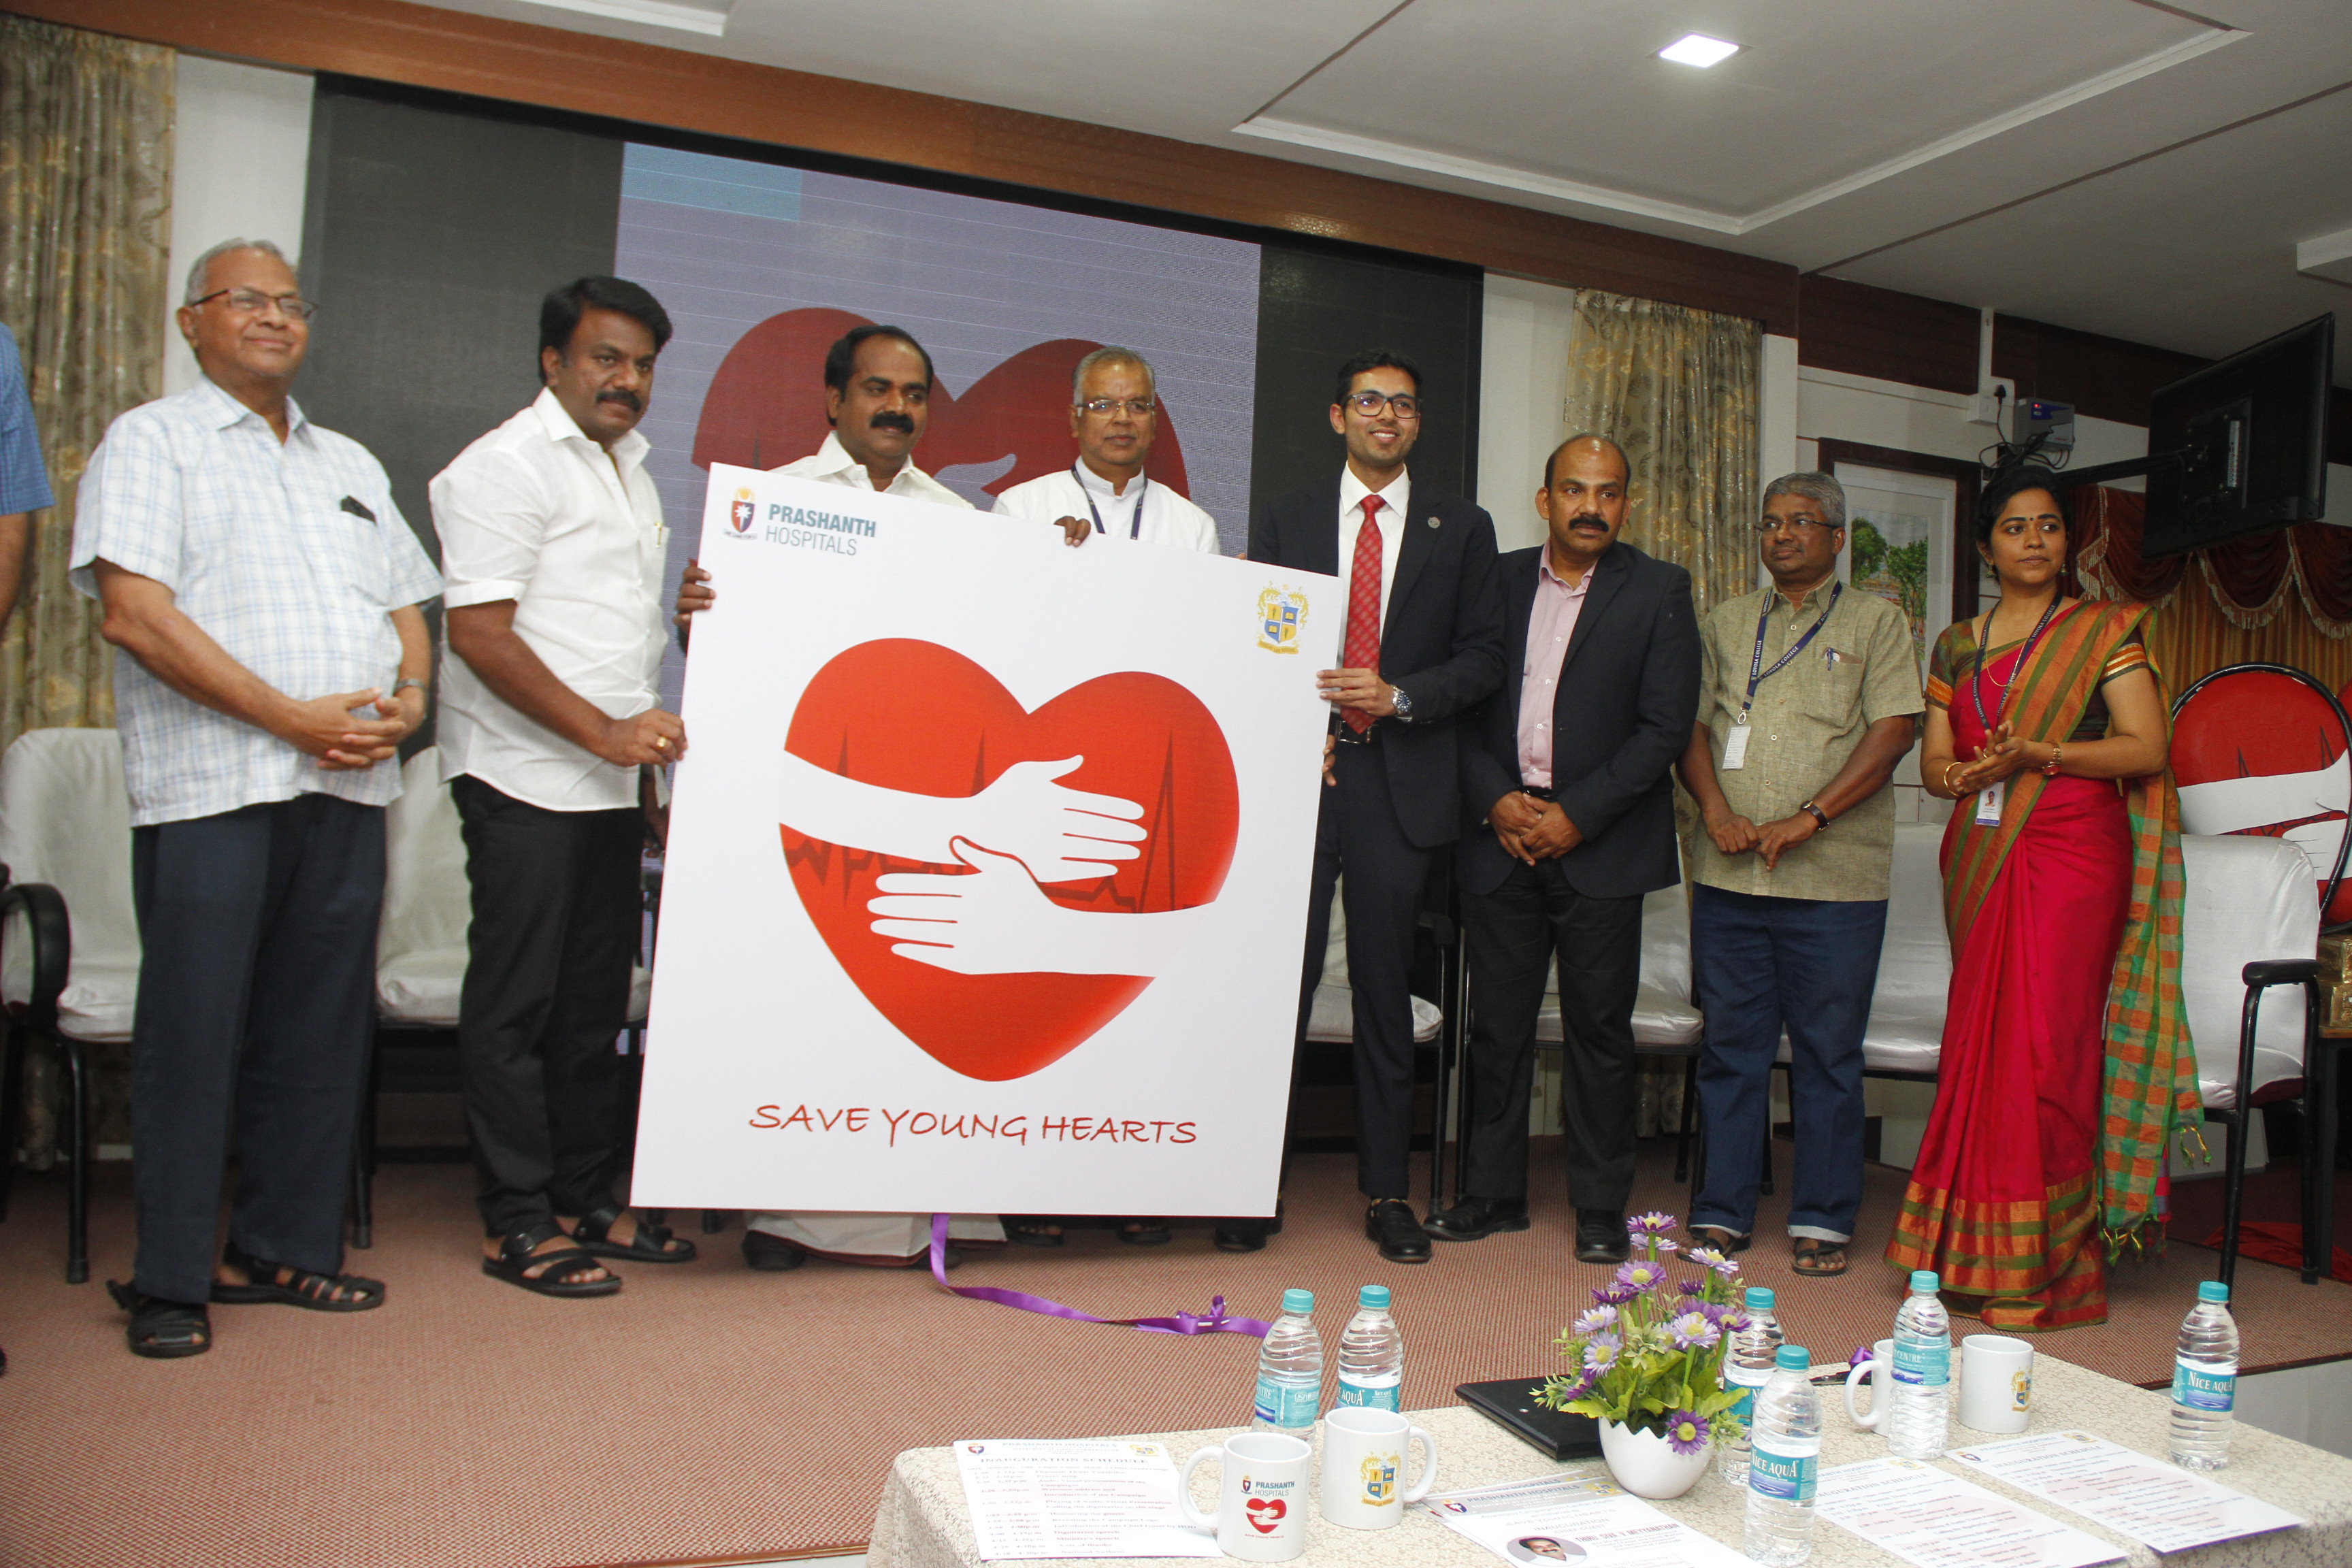 Campaign to Create Cardiac Awareness Among Youngsters Launched in the City by Prashanth Hospitals in Partnership with Loyola College